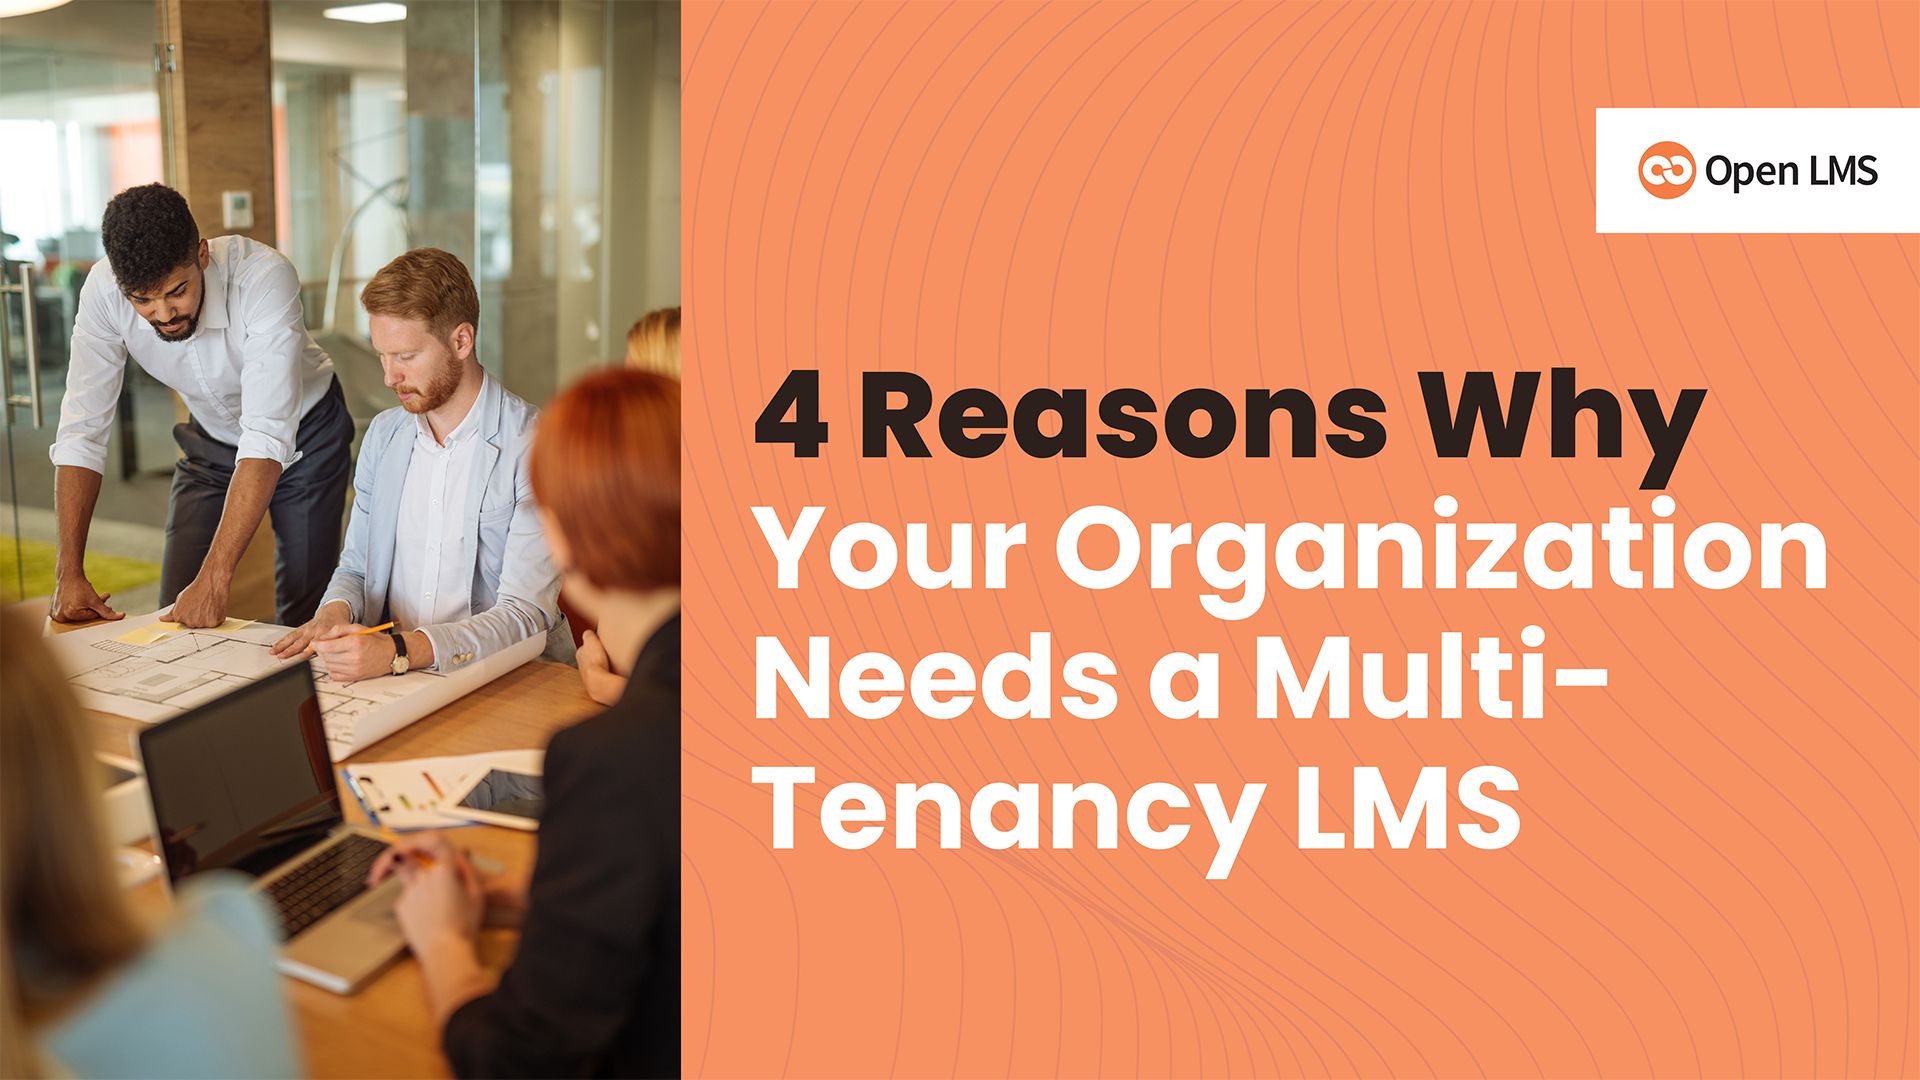 4 Reasons Why Your Organization Needs a Multi-Tenancy LMS